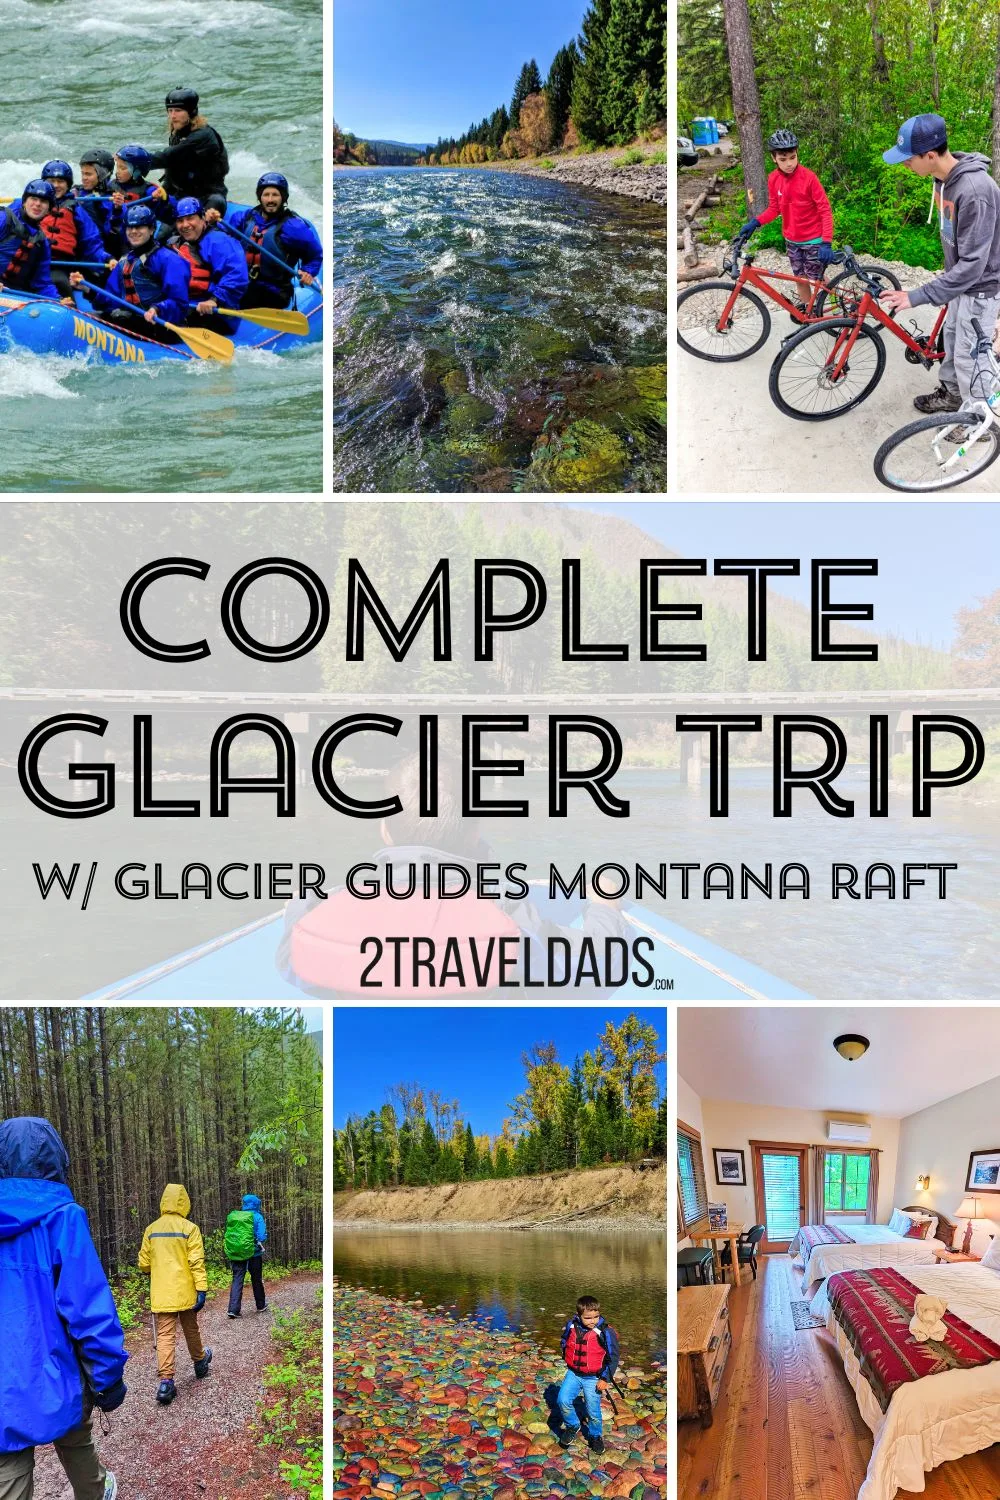 Here's how you have a fun, stress-free trip to Glacier National Park: stay, hike, bike and raft with one centralized company. Glacier Guides Montana Raft put together an awesome trip itinerary and lead us for a relaxing and adventurous visit.